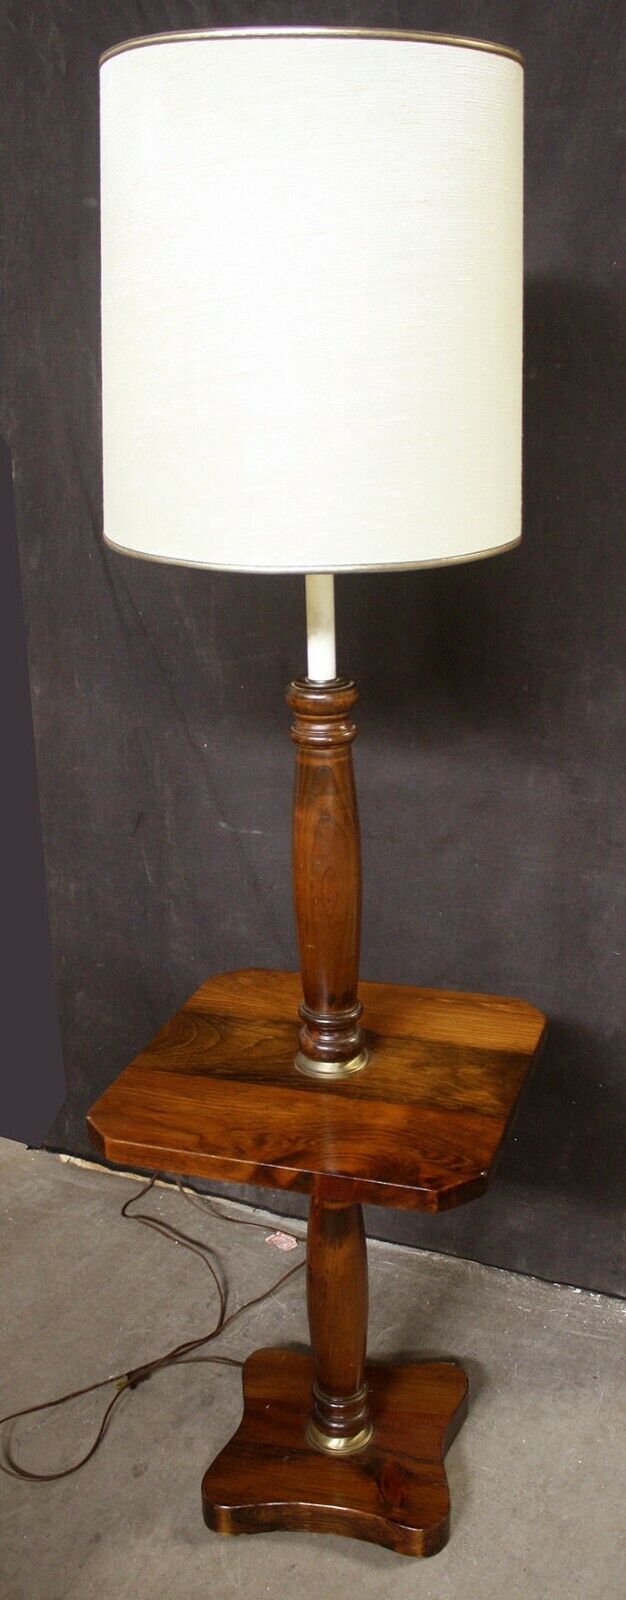 Vintage Antique Solid Wood Wooden Floor Lamp Light Side End Accent Sofa Table